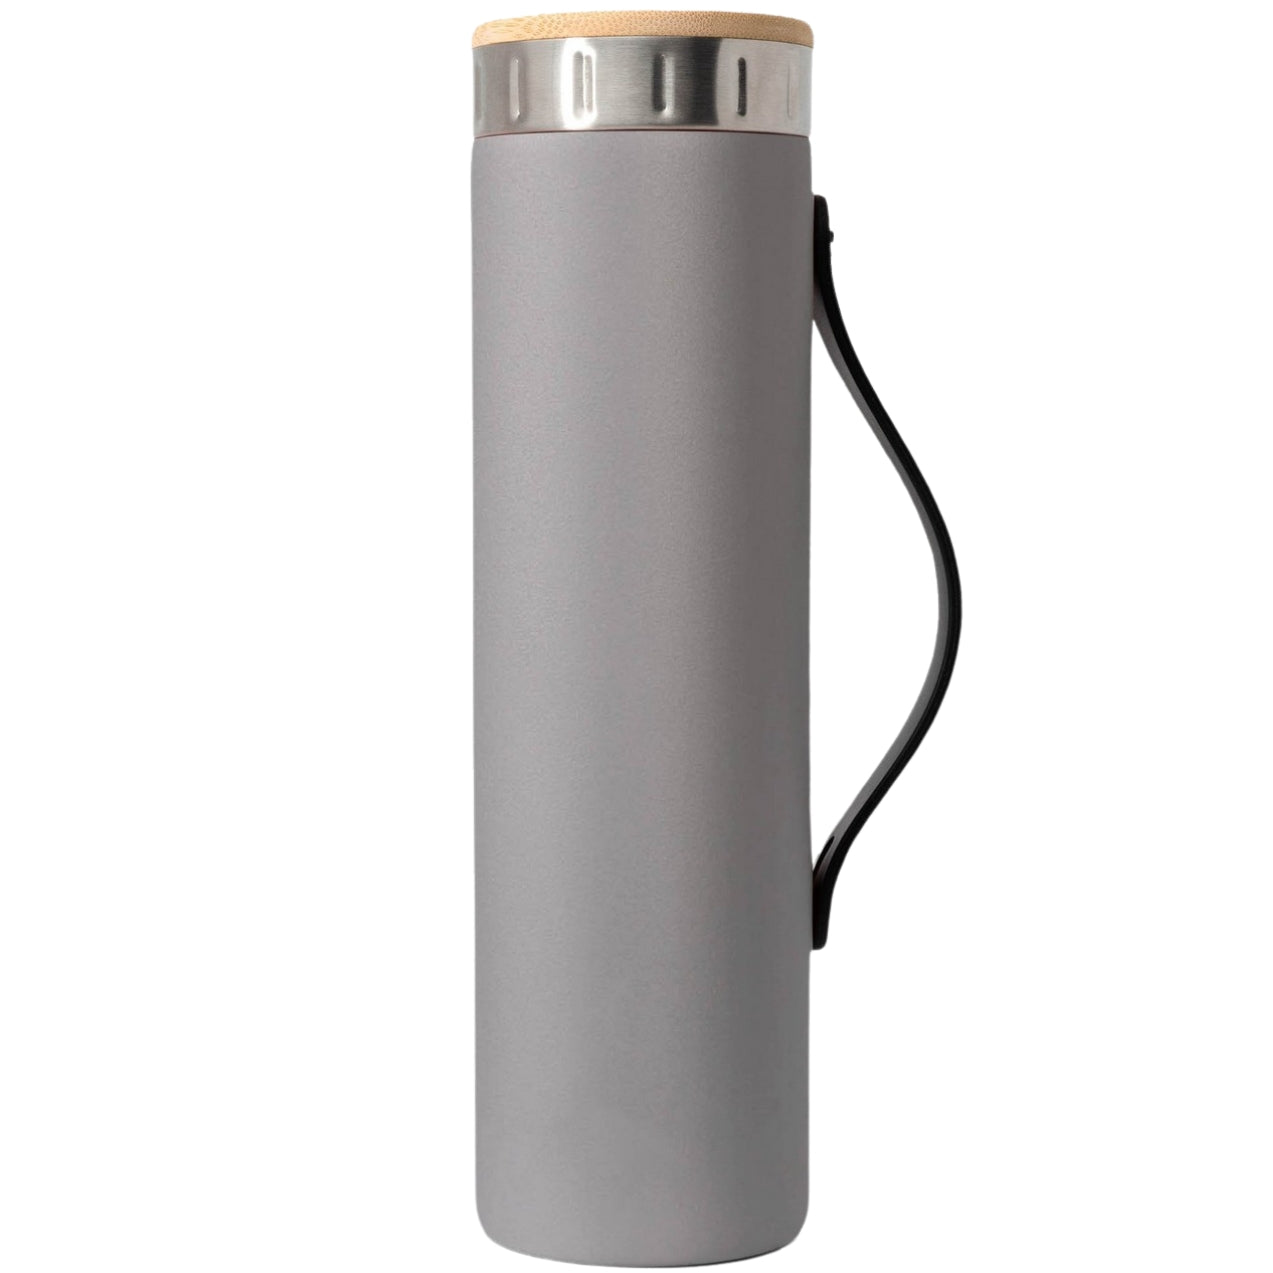 Customizable Elemental® 20 oz Stainless Steel Bottle with Strainer in graphite